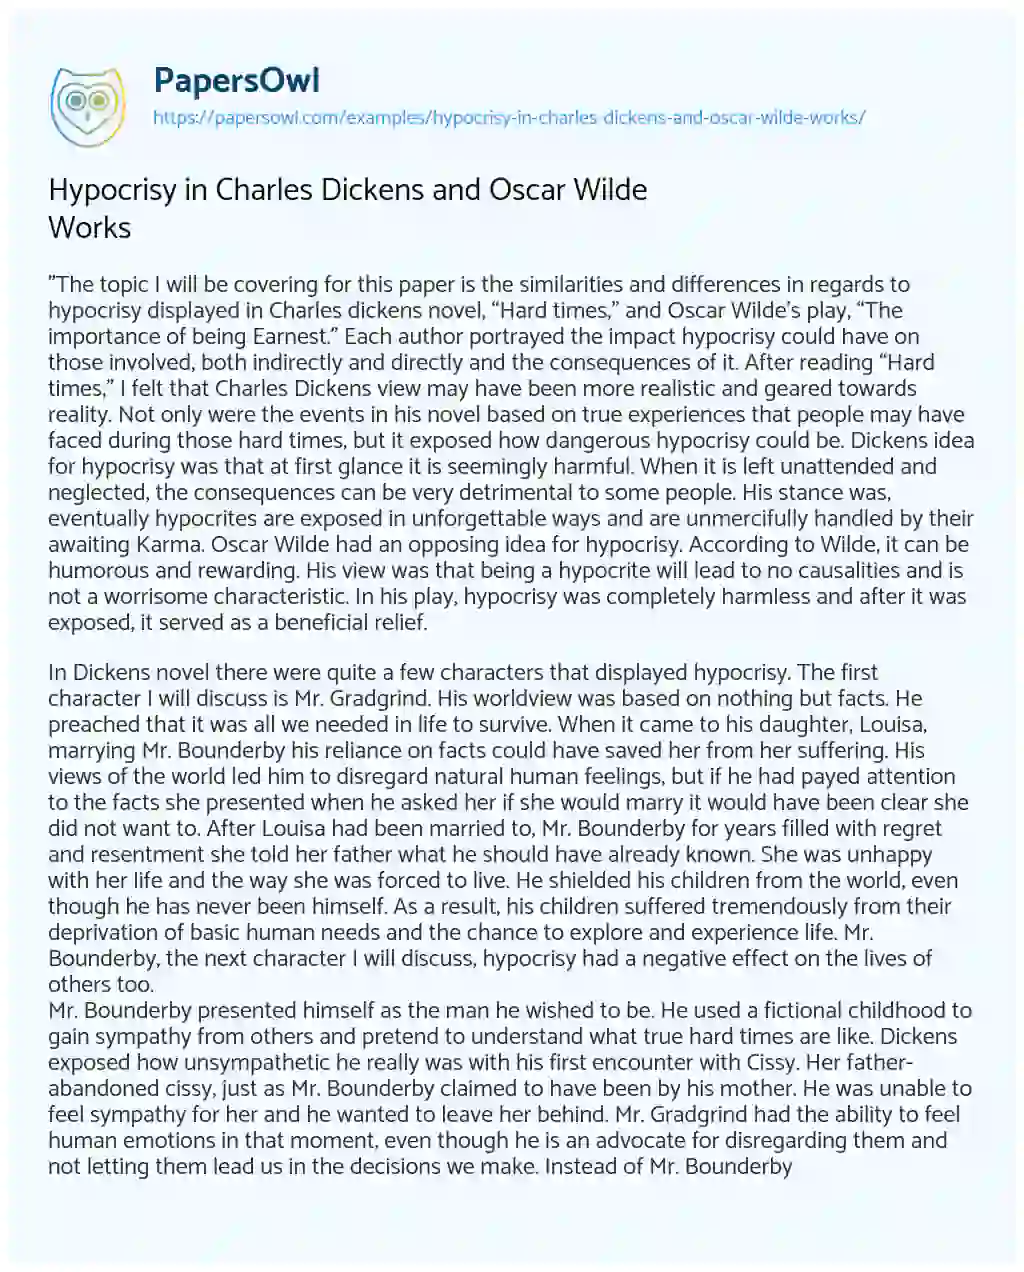 Essay on Hypocrisy in Charles Dickens and Oscar Wilde Works